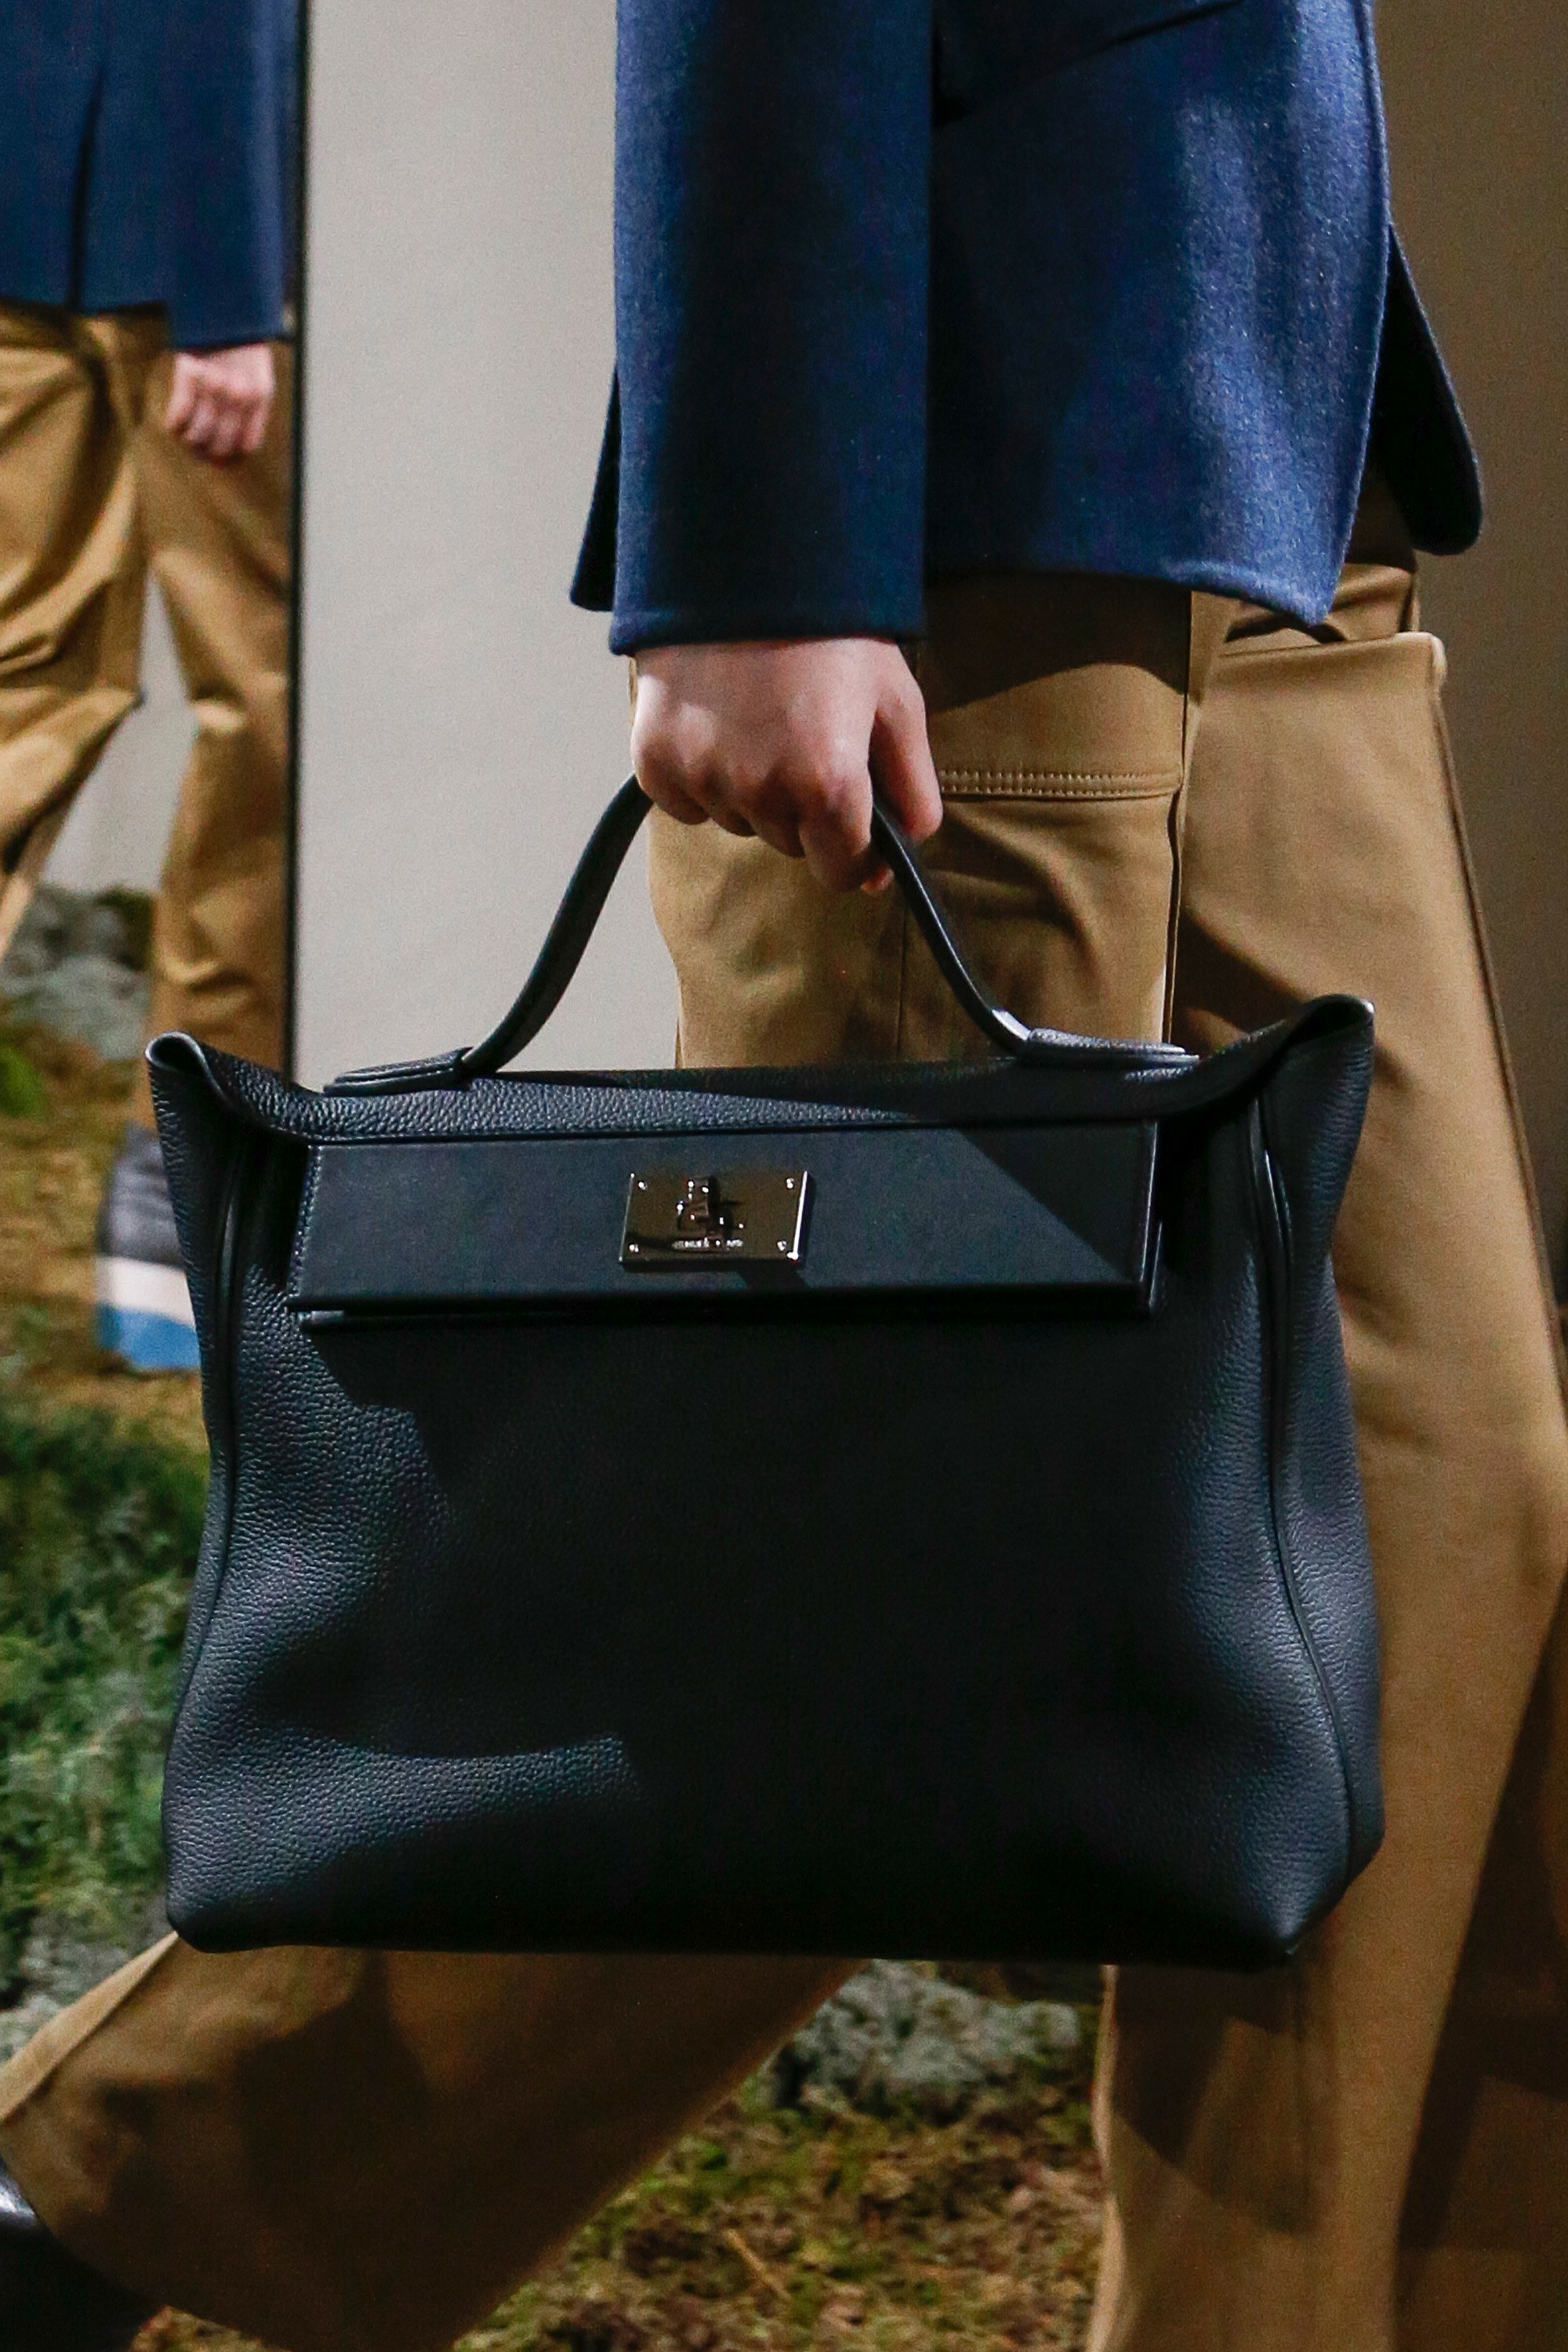 Hermes 24/24 Slouchy Bag Guide from Pre-Fall 2019 - Spotted Fashion